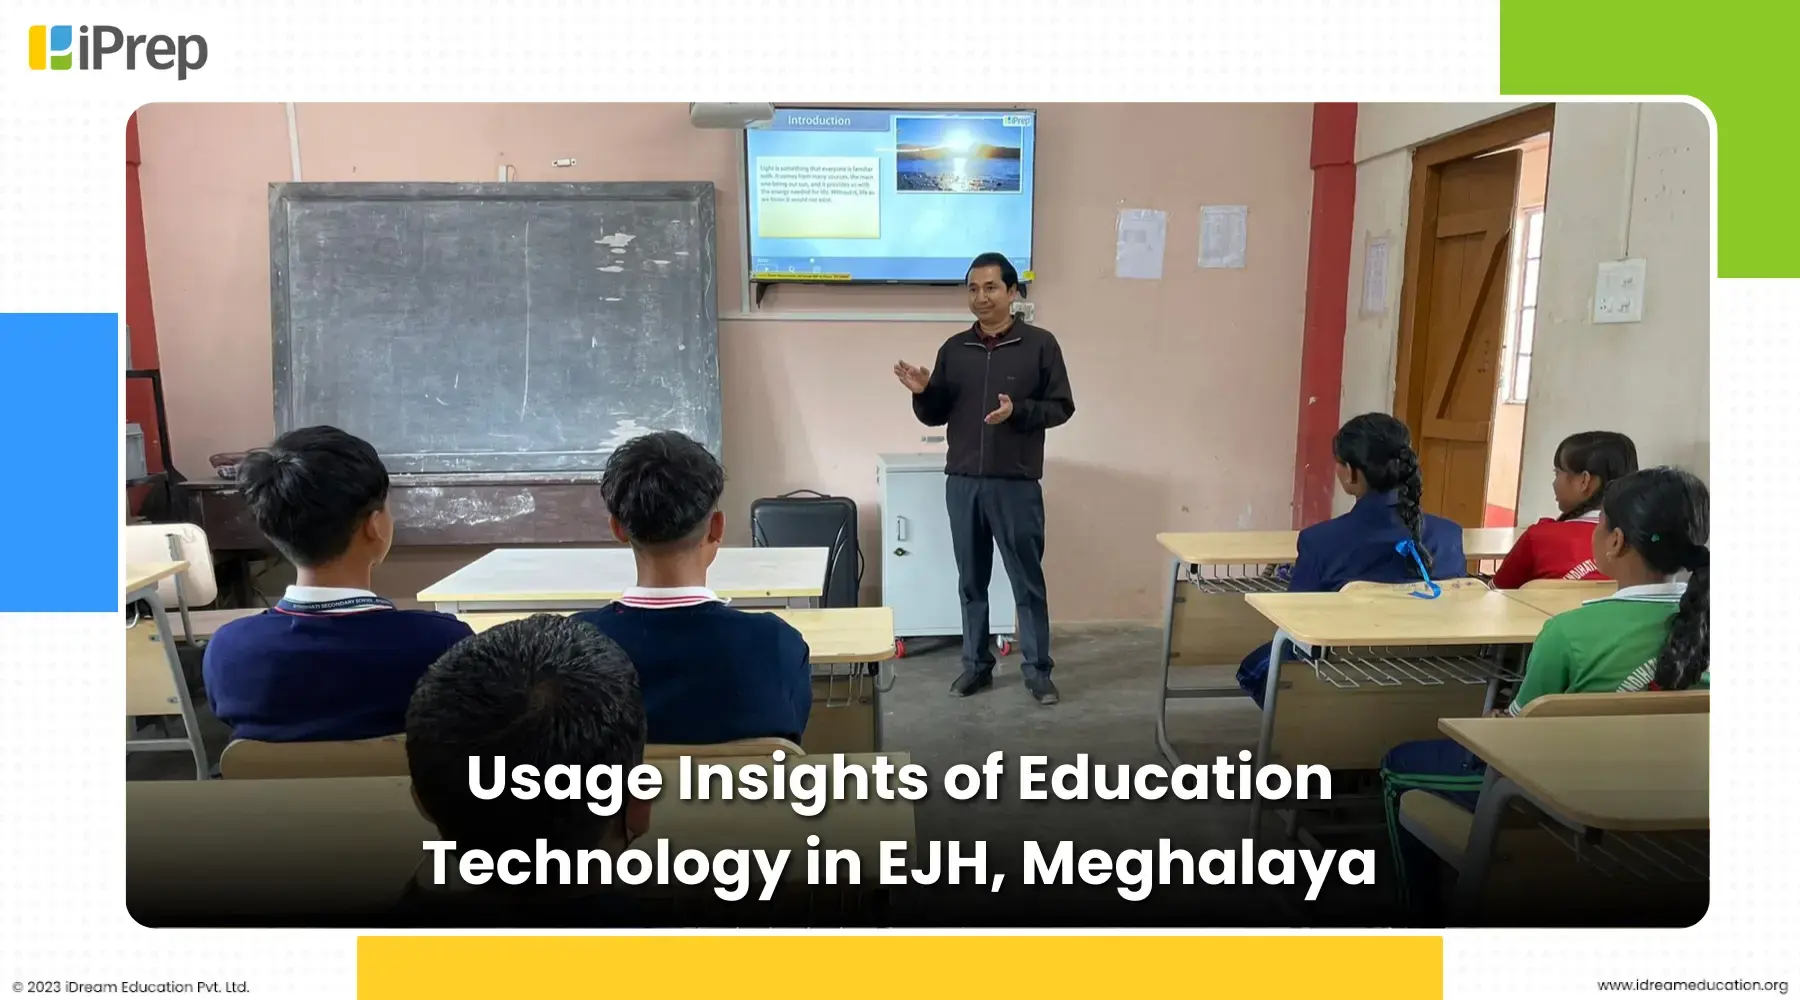 A smart class, an easy to setup, manage and use education technology being used in schools of Meghalaya